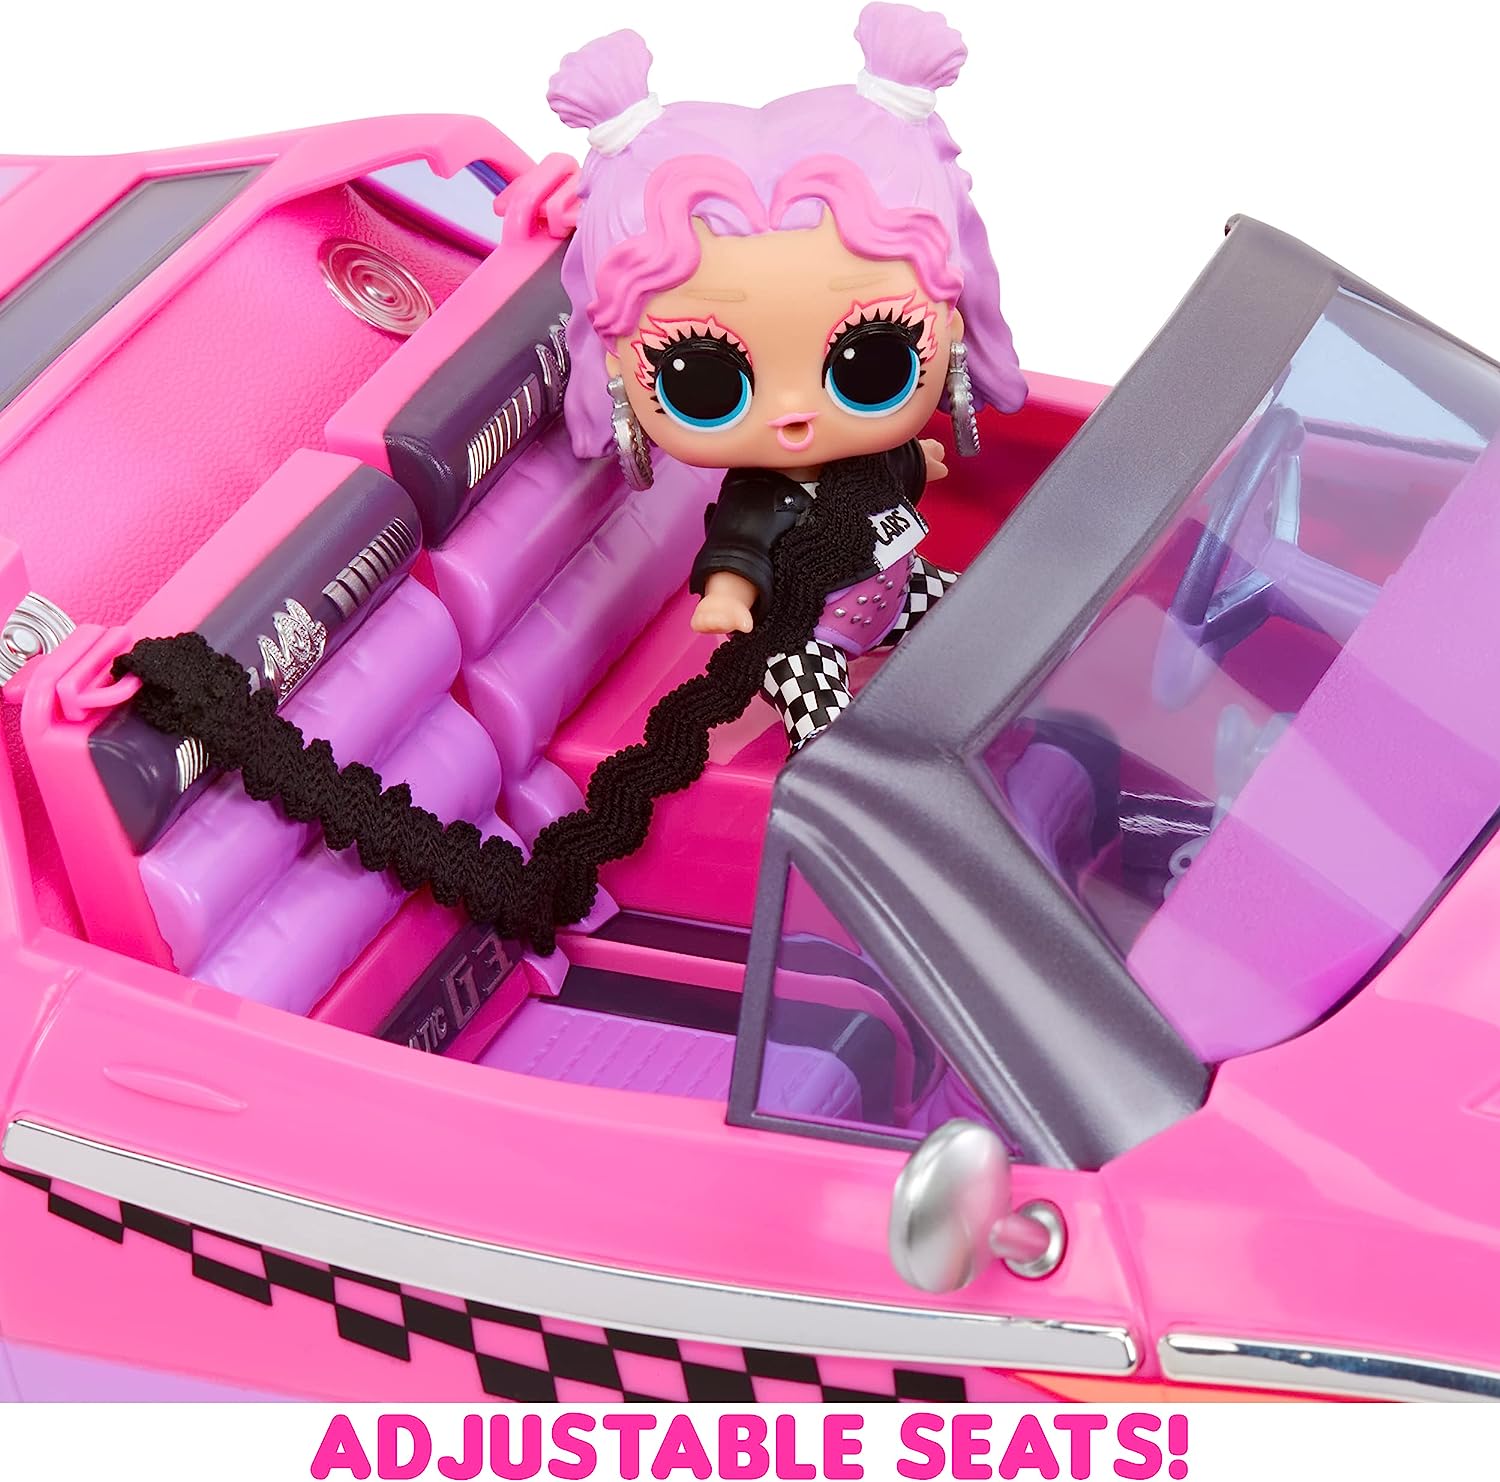 L.O.L. Surprise! LOL Surprise City Cruiser, Pink and Purple Sports Car with Fabulous Features and an Exclusive Doll